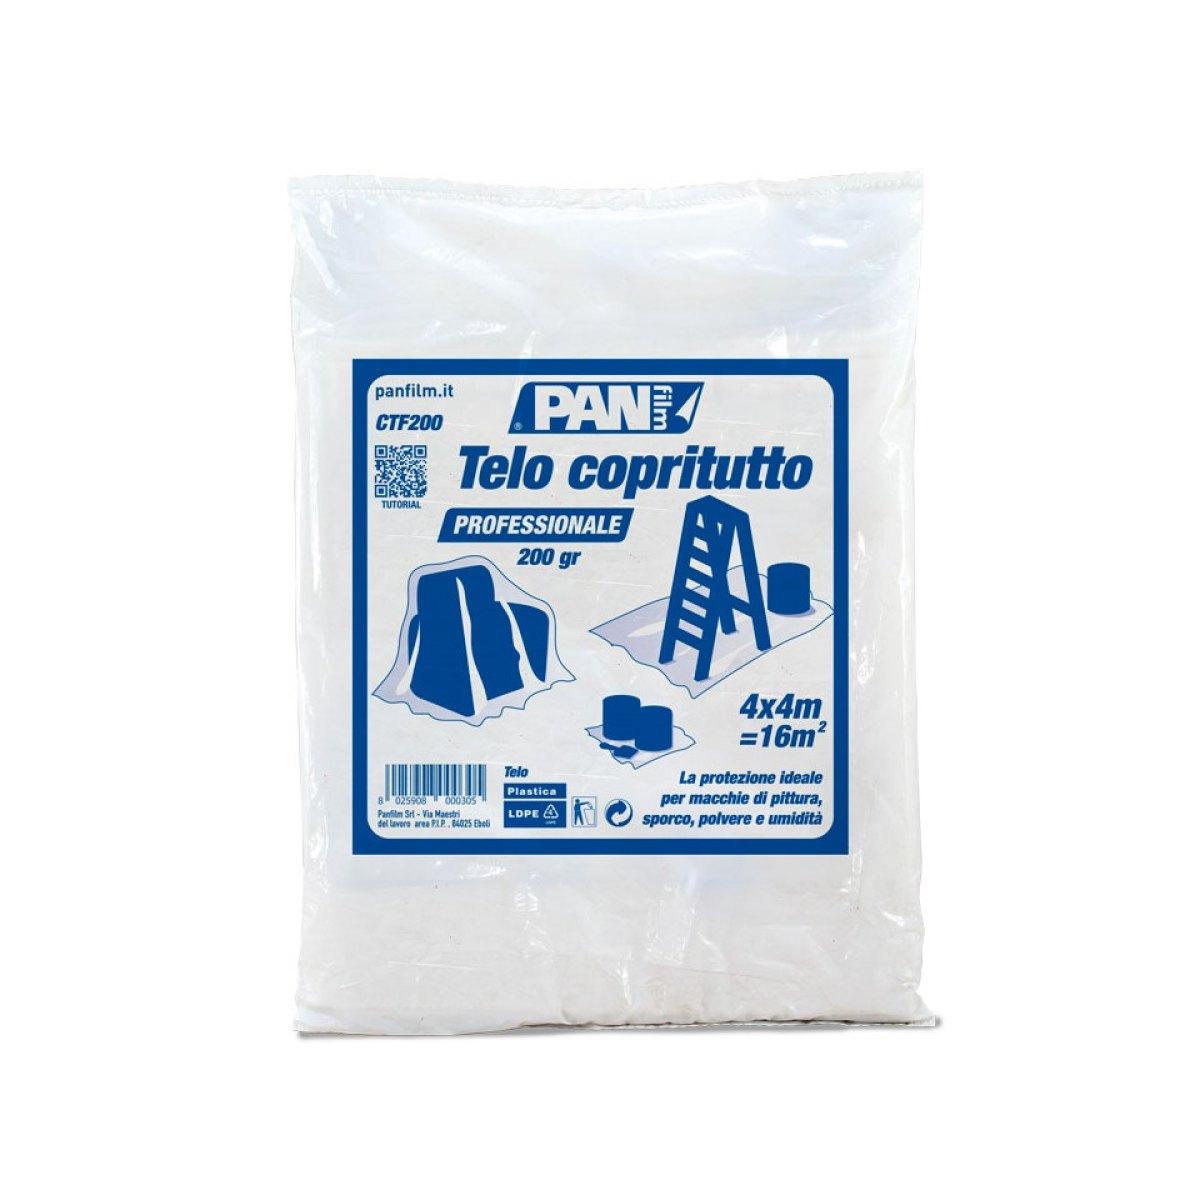 Panfilm Telo copritutto ldpe 4x4 200 gr 2301170000196 8025908000305